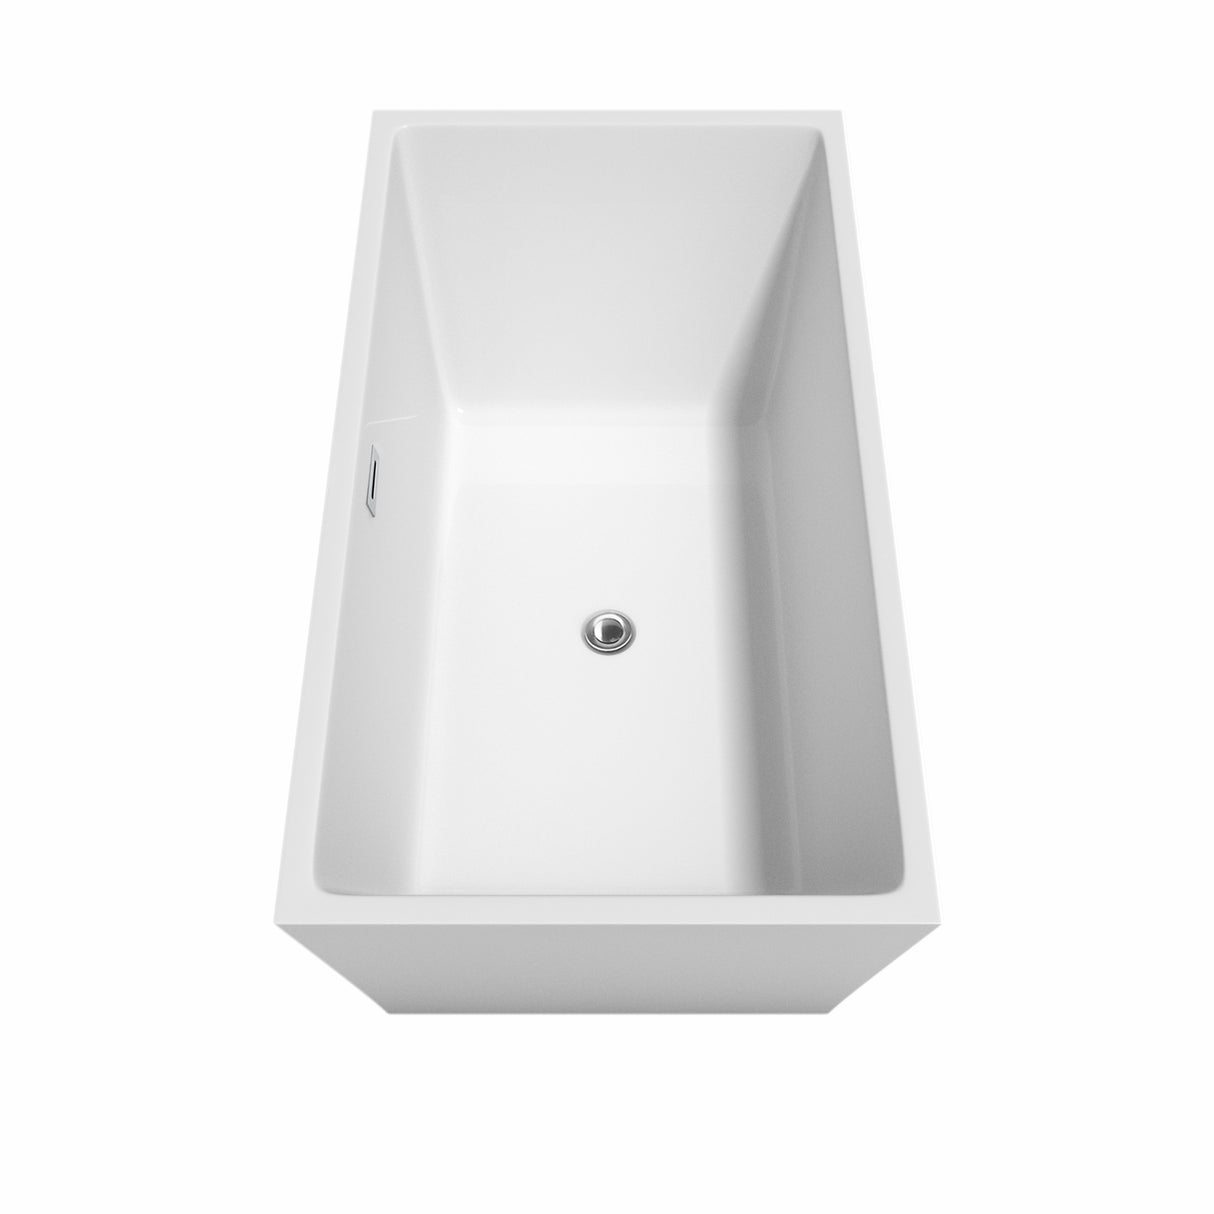 Sara 59 Inch Freestanding Bathtub in White with Polished Chrome Trim and Floor Mounted Faucet in Matte Black